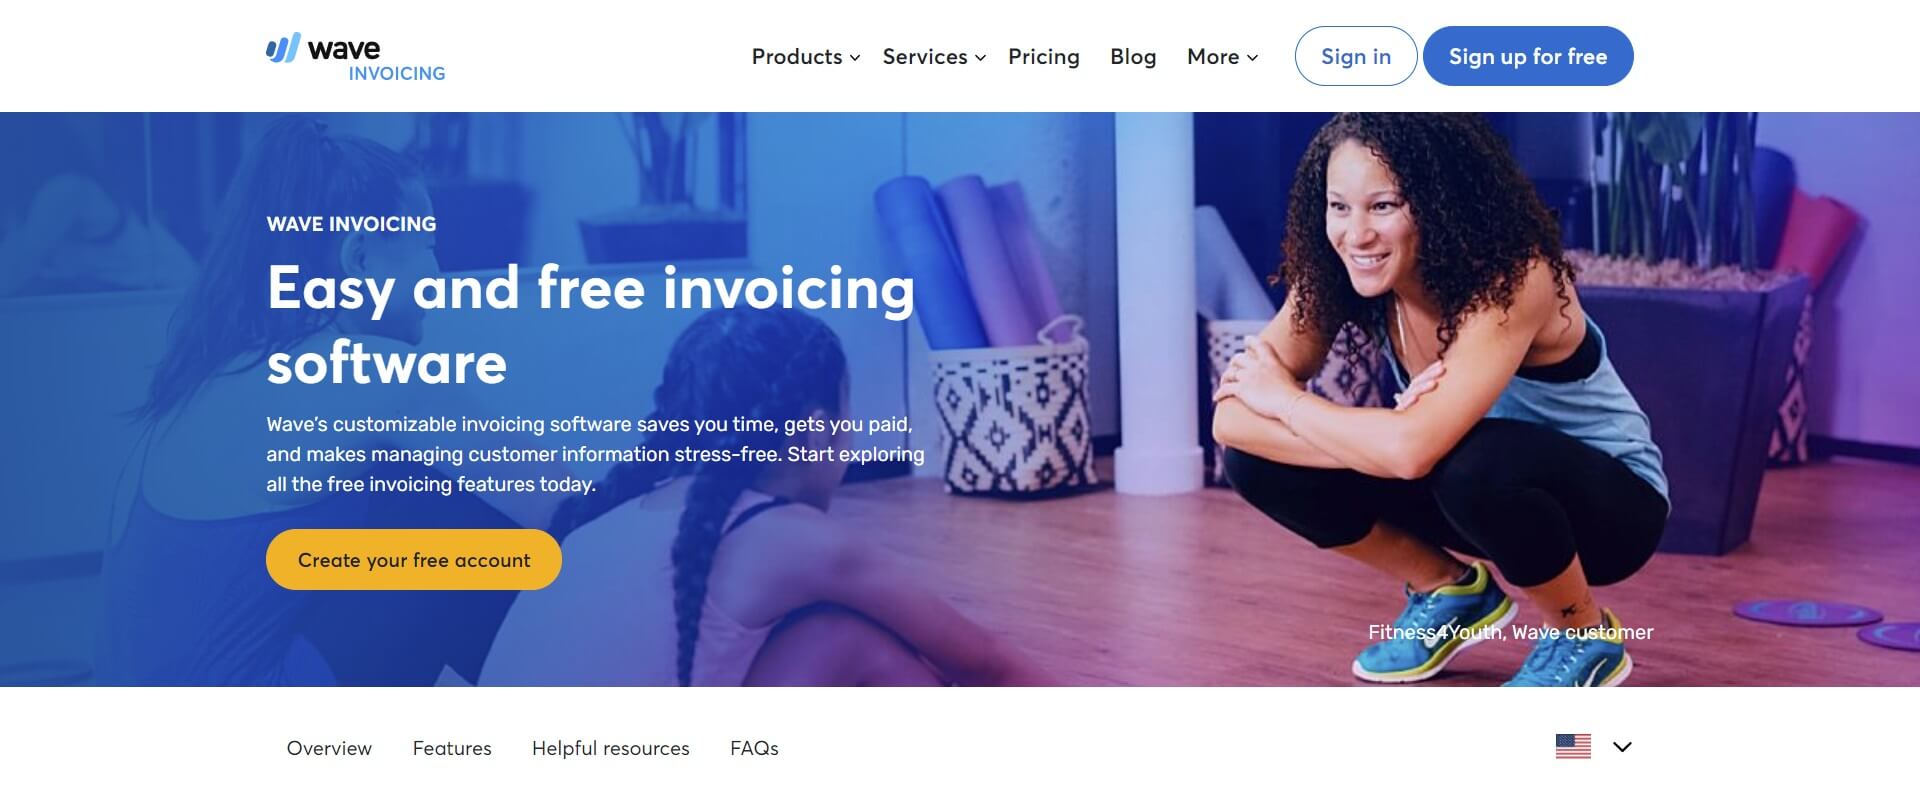 invoicing software, best invoice apps, free invoice apps, best free invoice apps, invoice creator app, invoice app for iPhone, invoice maker app, invoice app for Android, online invoice app